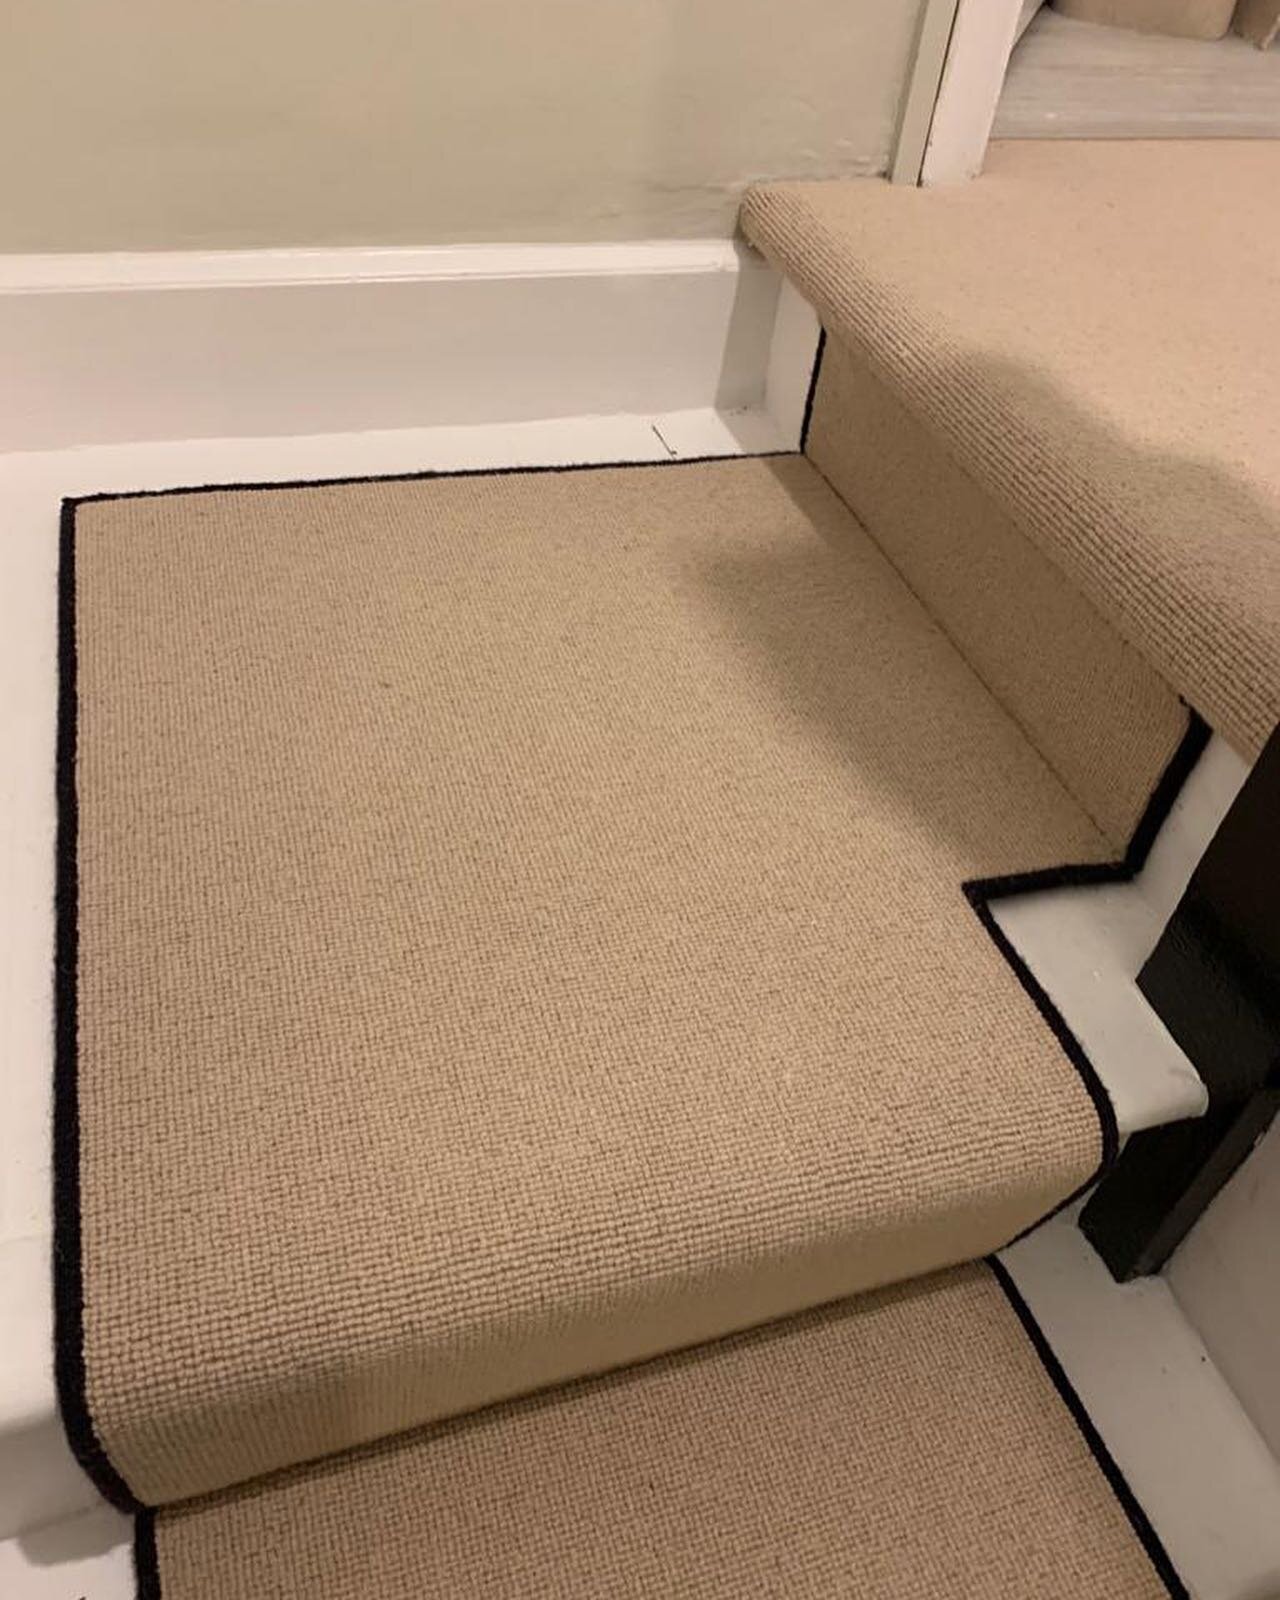 Stunning stair runner 😍 Carpet by @victoria_carpets_limited supplied and installed. Carpet is Natural Coordinates in colour &lsquo;Buckram&rsquo;.

Get in touch for an appointment at our showroom or the comfort of your own home. We provide a free me